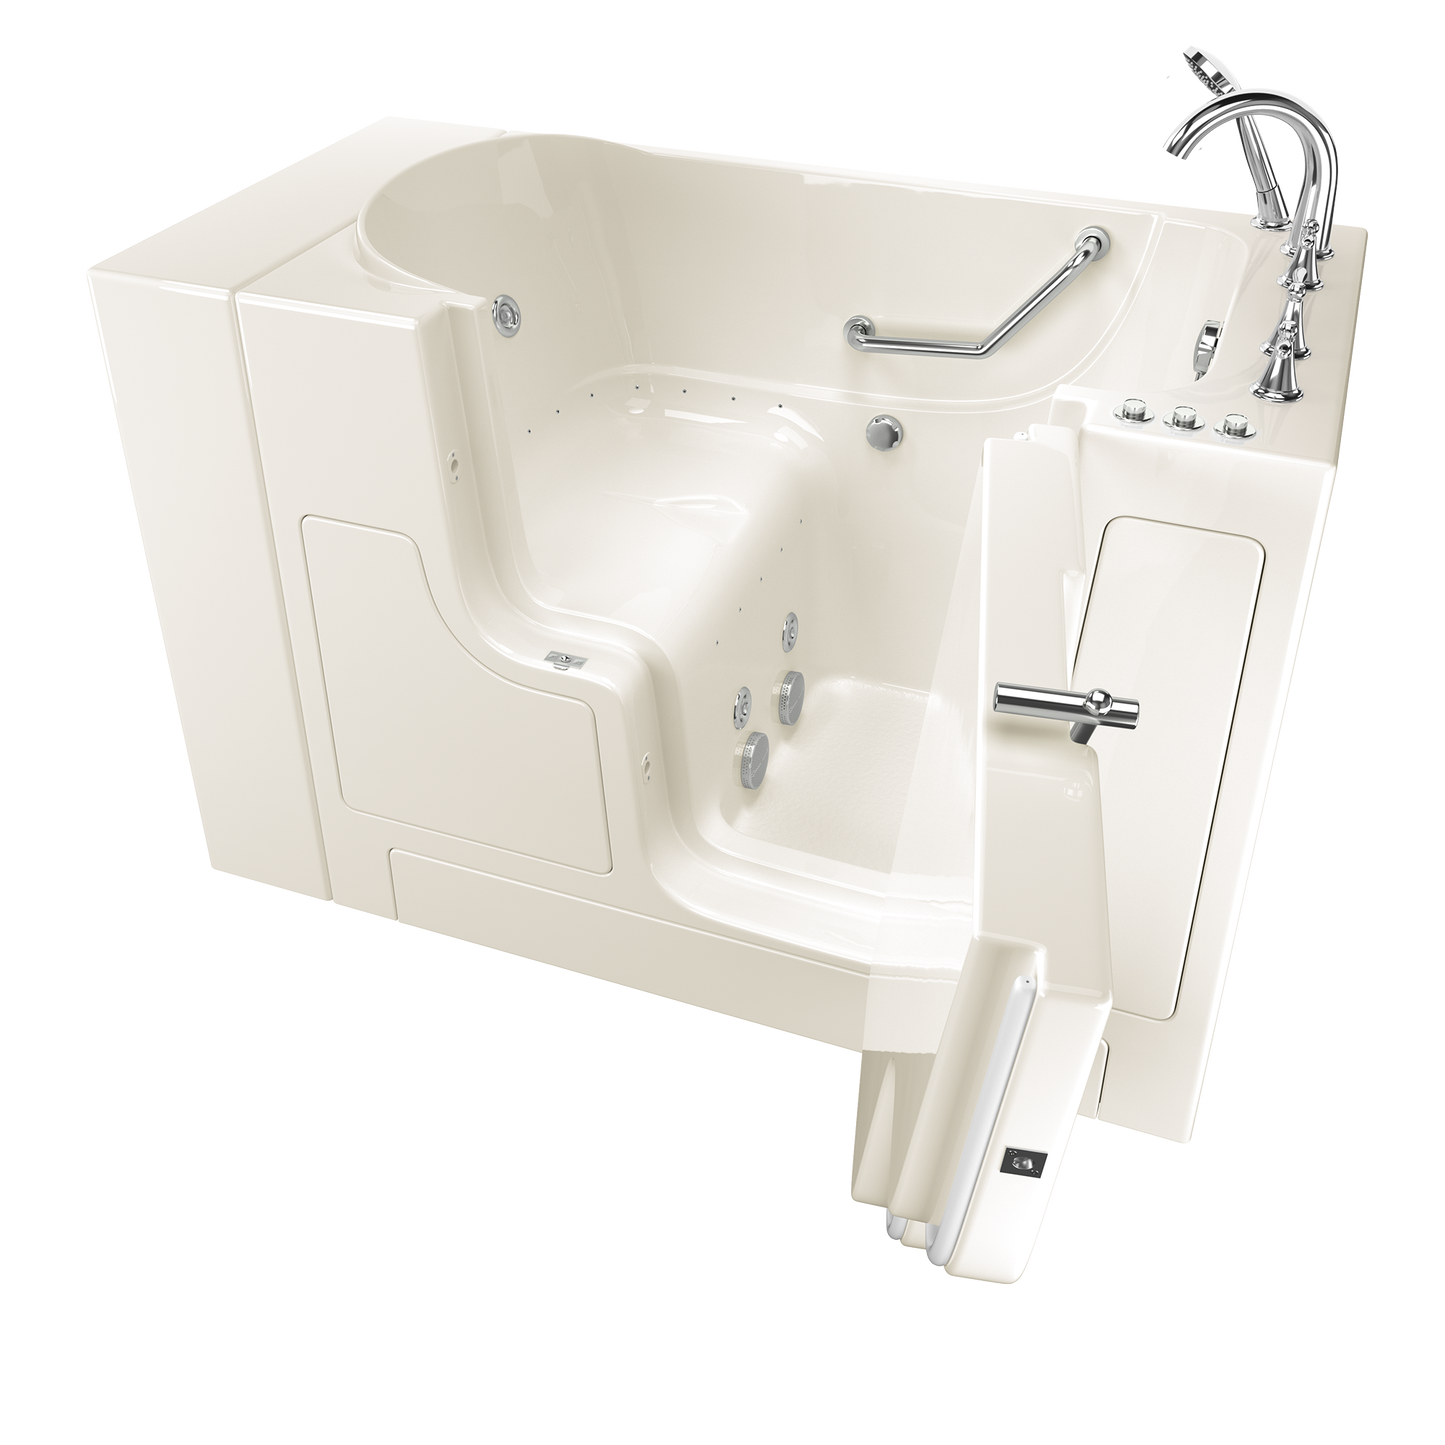 AMERICAN-STANDARD SS9OD5230RD-BC-PC, Gelcoat Premium Series 30 in. x 52 in. Outward Opening Door Walk-In Bathtub with Air Spa and Whirlpool system in Wib Linen